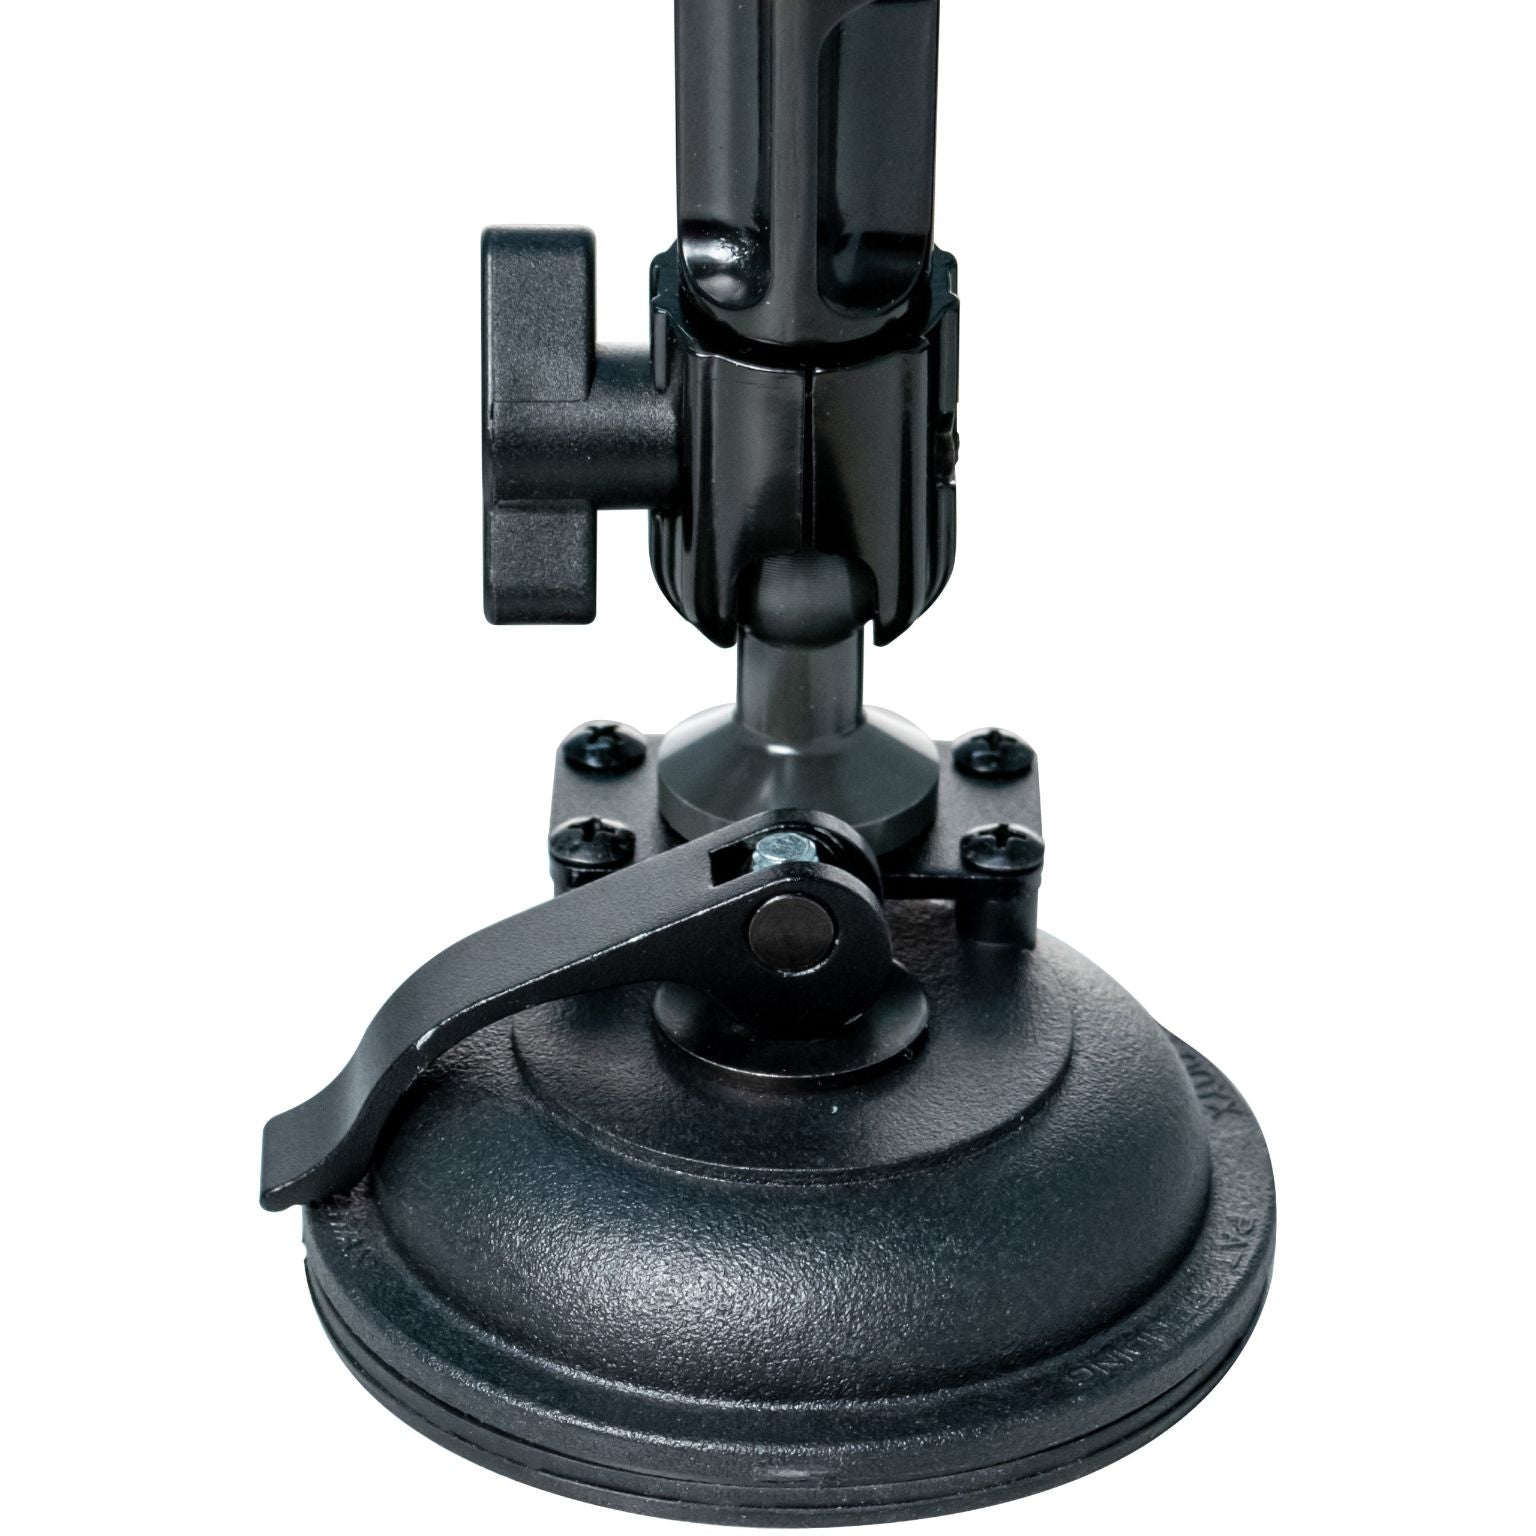 Custom Flex Suction Mount for 7-14 Inch Tablets, including 13-inch iPad Air M2/ Pro M4 (2024), iPad 10.2-inch (7th/ 8th/ 9th Gen.) and more